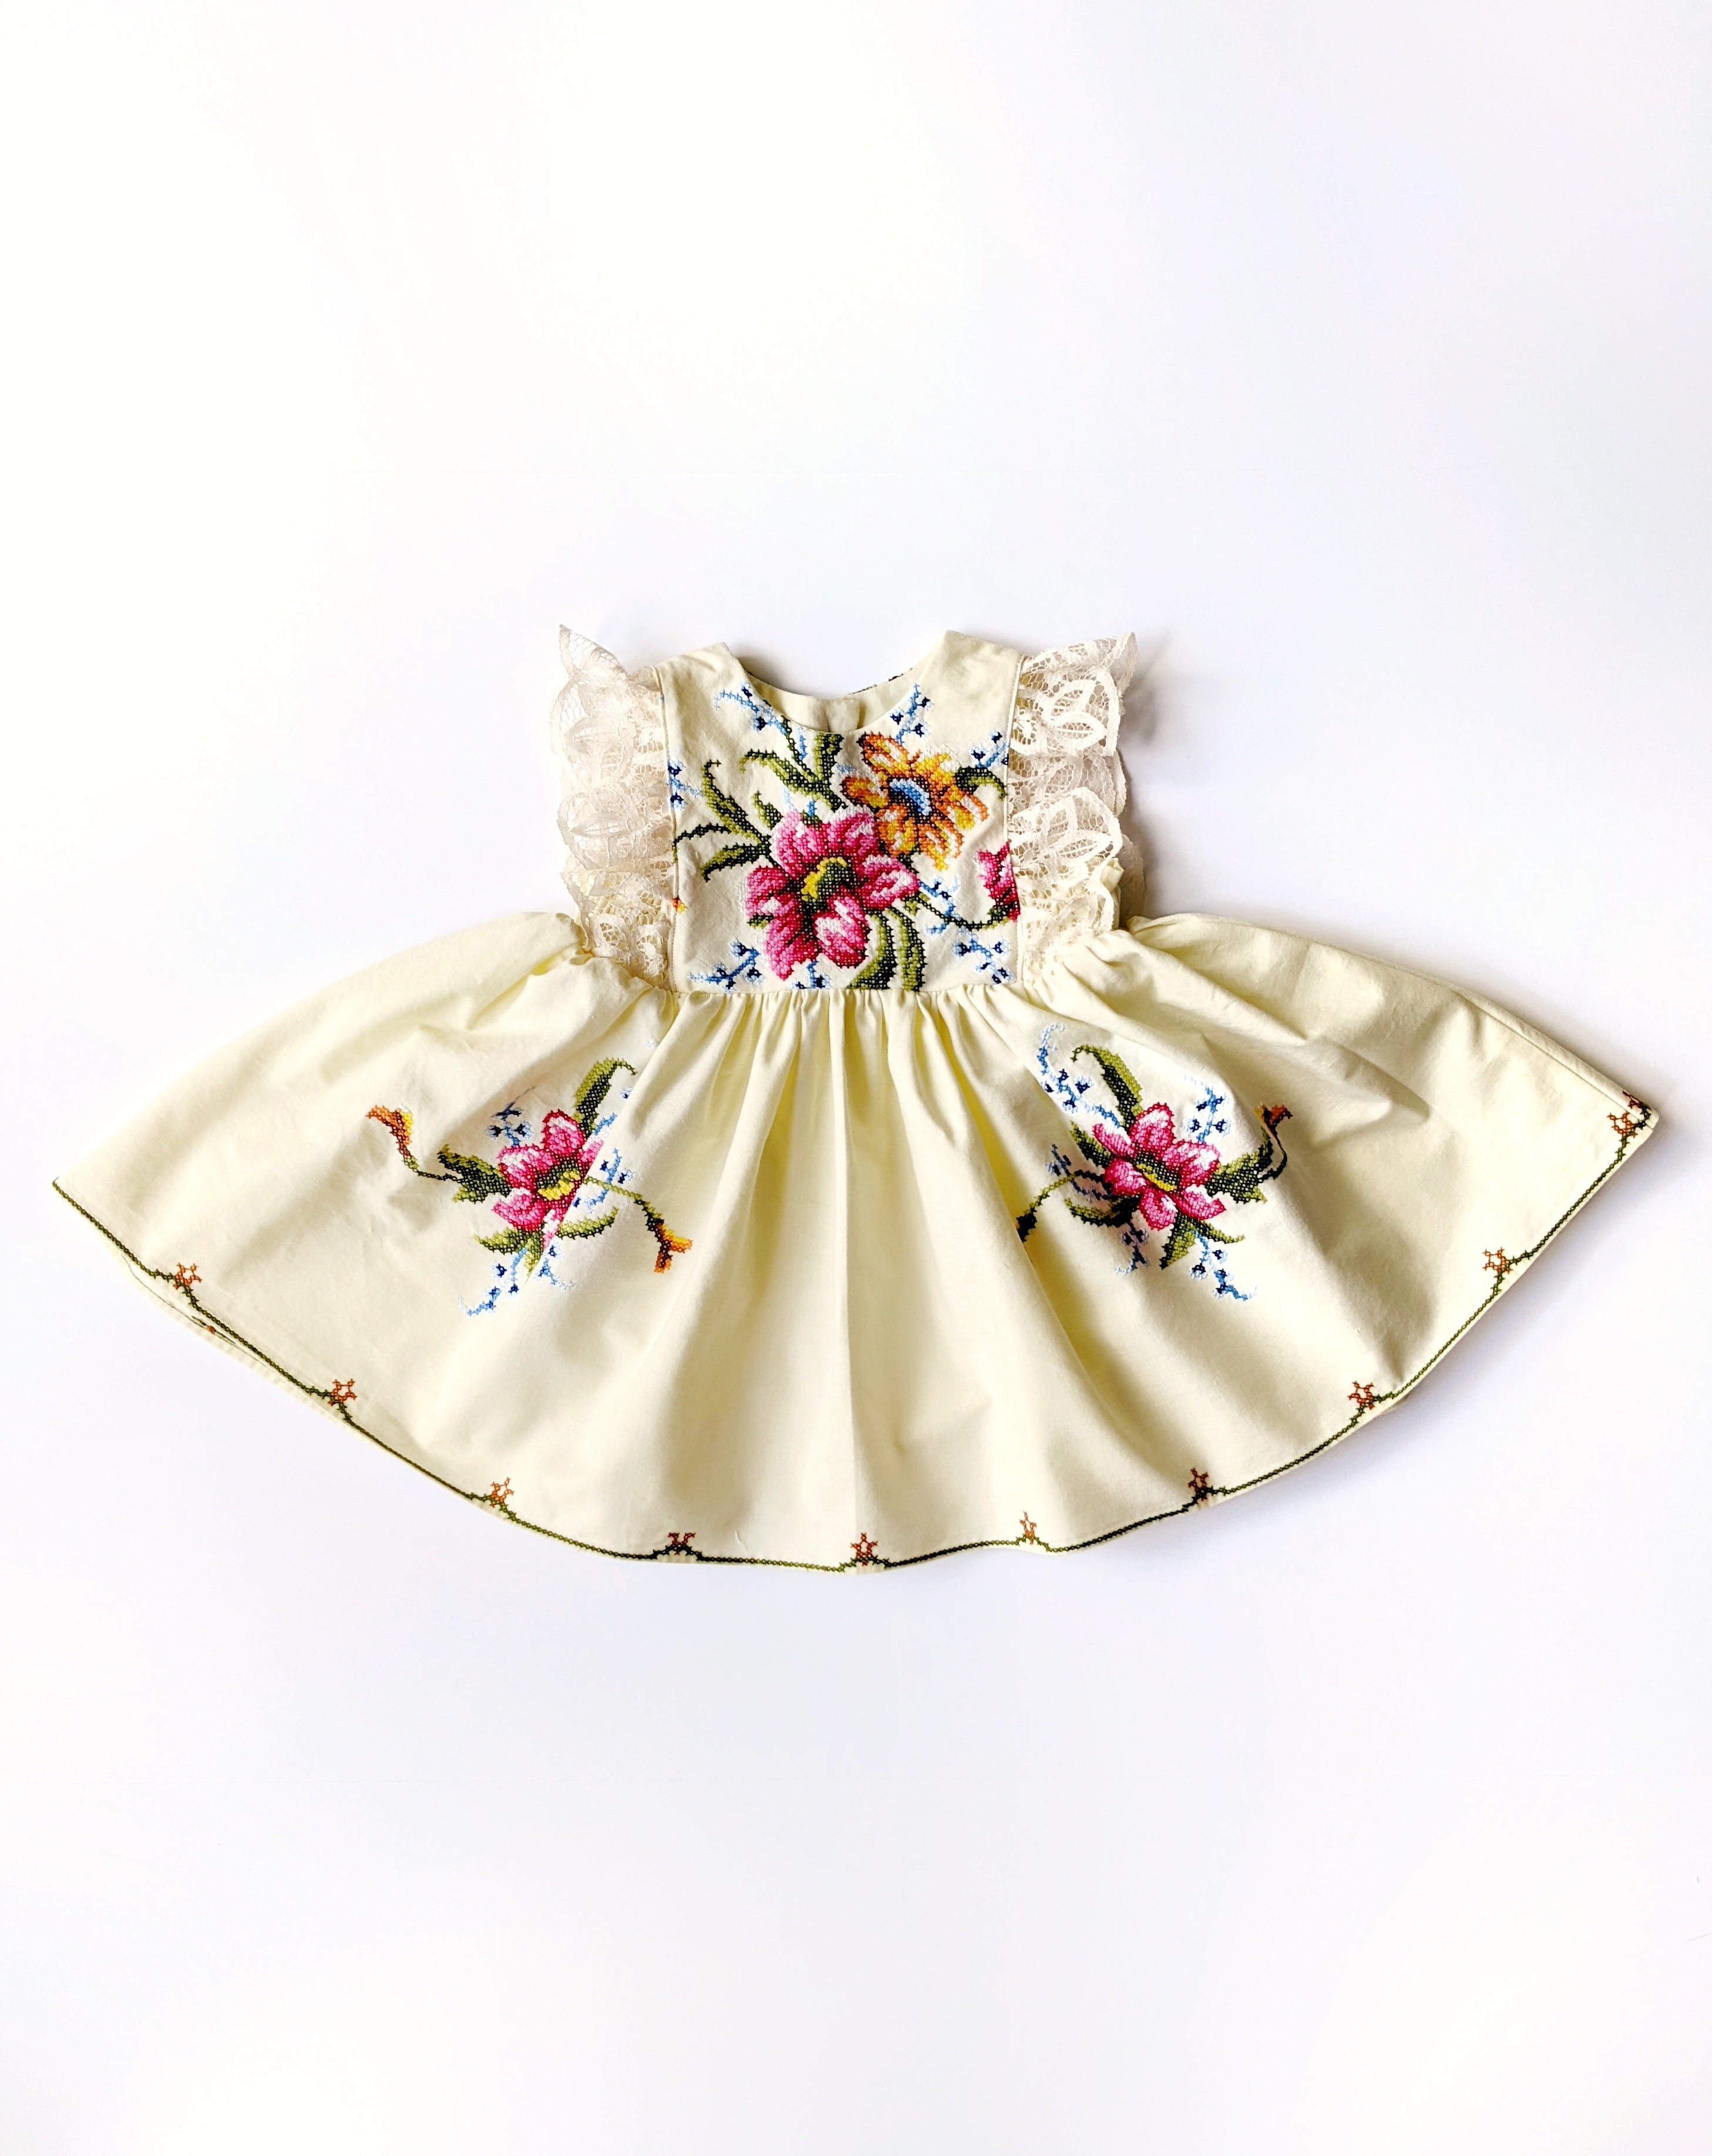 "Cassia" style Embroidered Dress- Size 2T